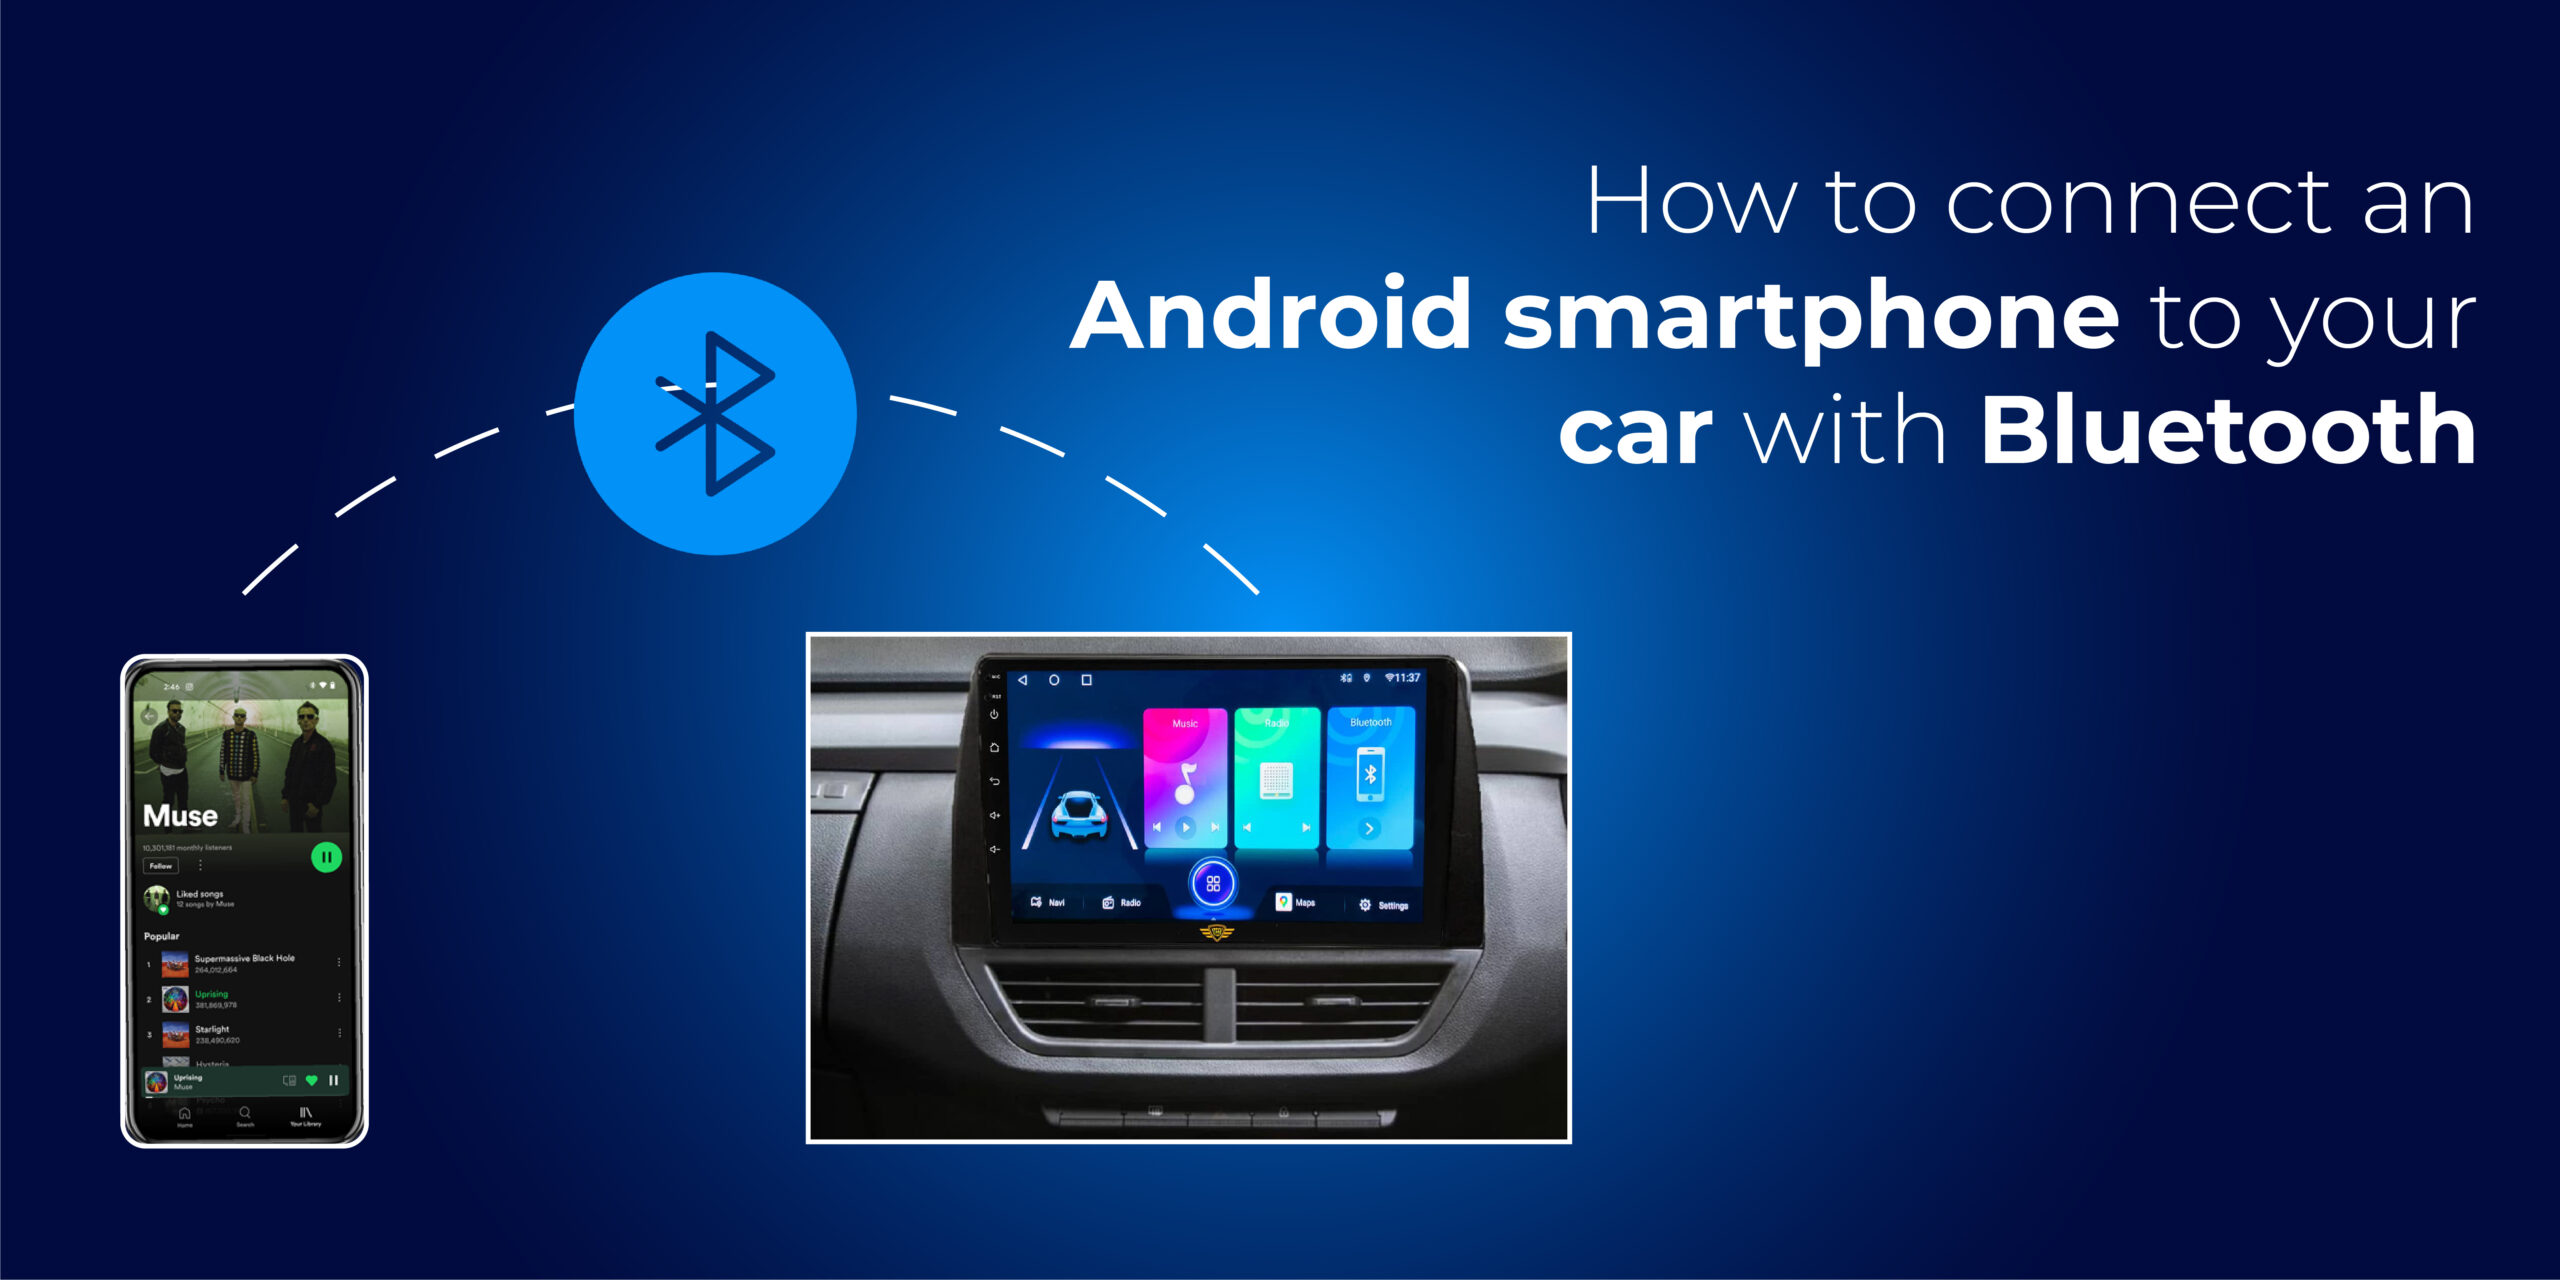 Connect Android smartphone to car bluetooth|Android phone to your car|method to connect|phone while driving|Android Auto|Bluetooth range Devices|connect Bluetooth with car